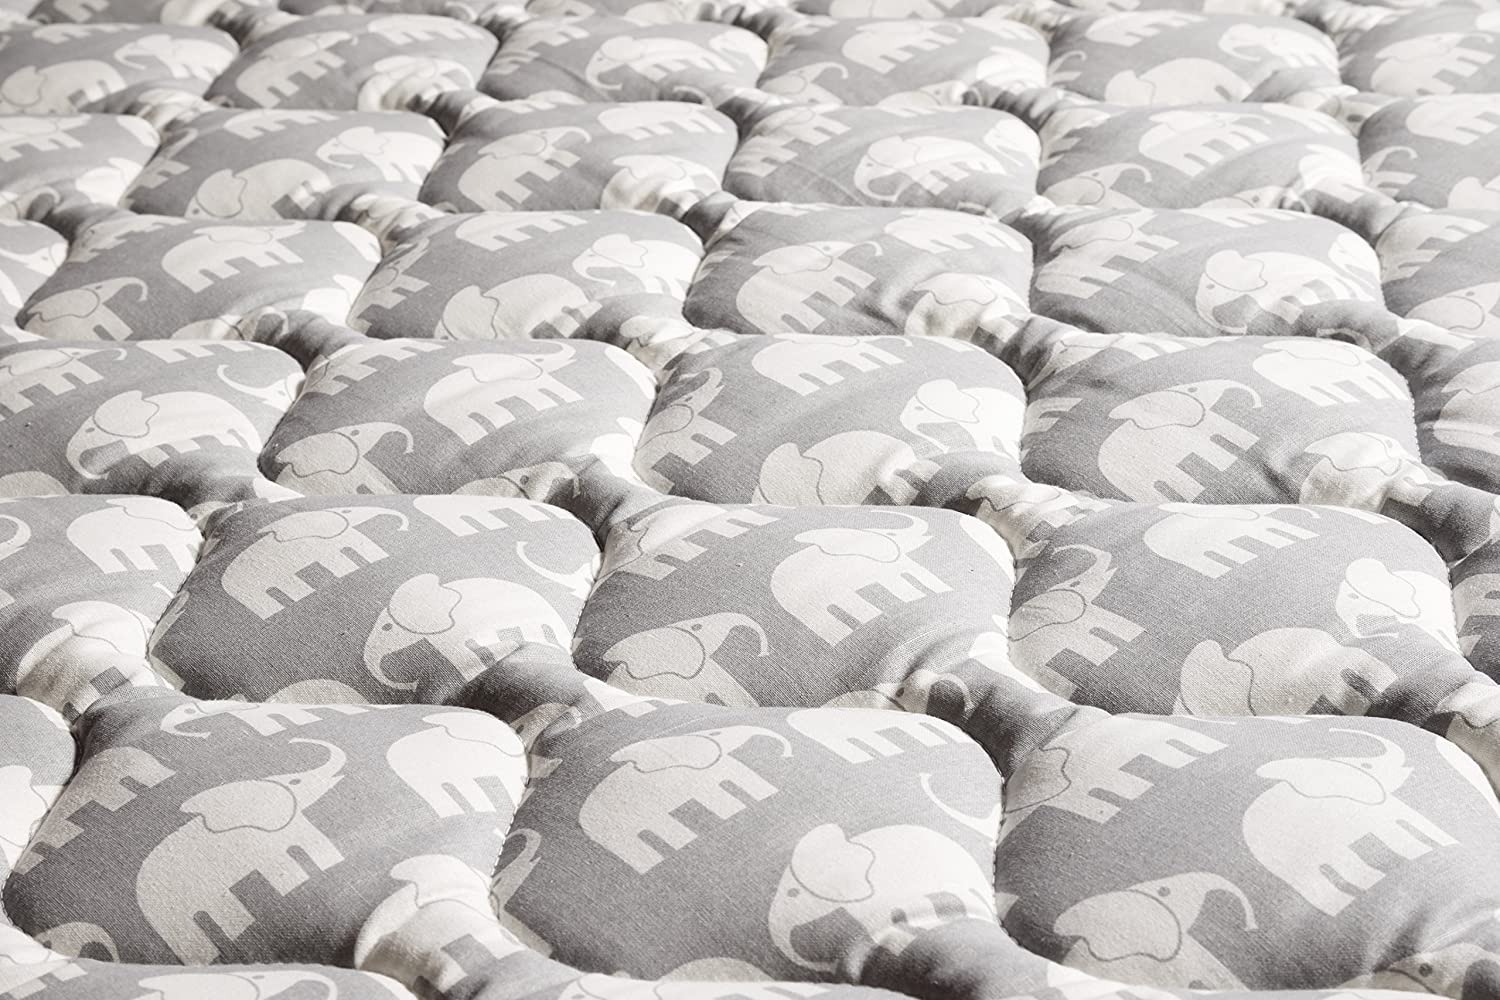 Babyfrücht Crawling Blankets - Non-Slip / Waterproof - Washable up to 60 °C - Large (130 x 200, BLP: Jungle Animals Colour